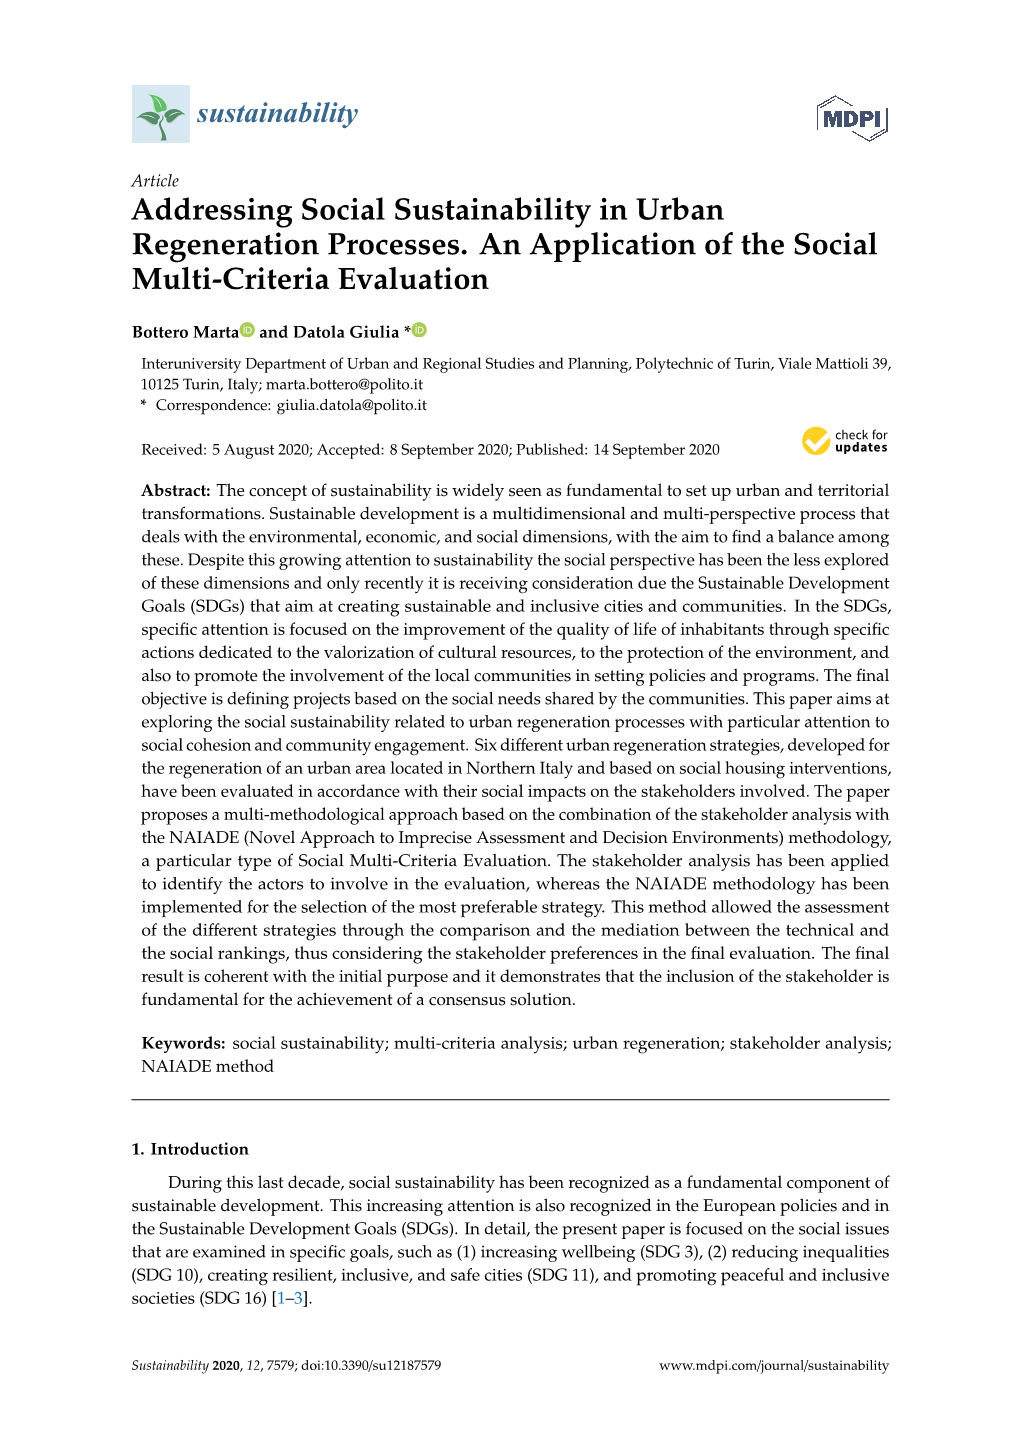 Addressing Social Sustainability in Urban Regeneration Processes. an Application of the Social Multi-Criteria Evaluation